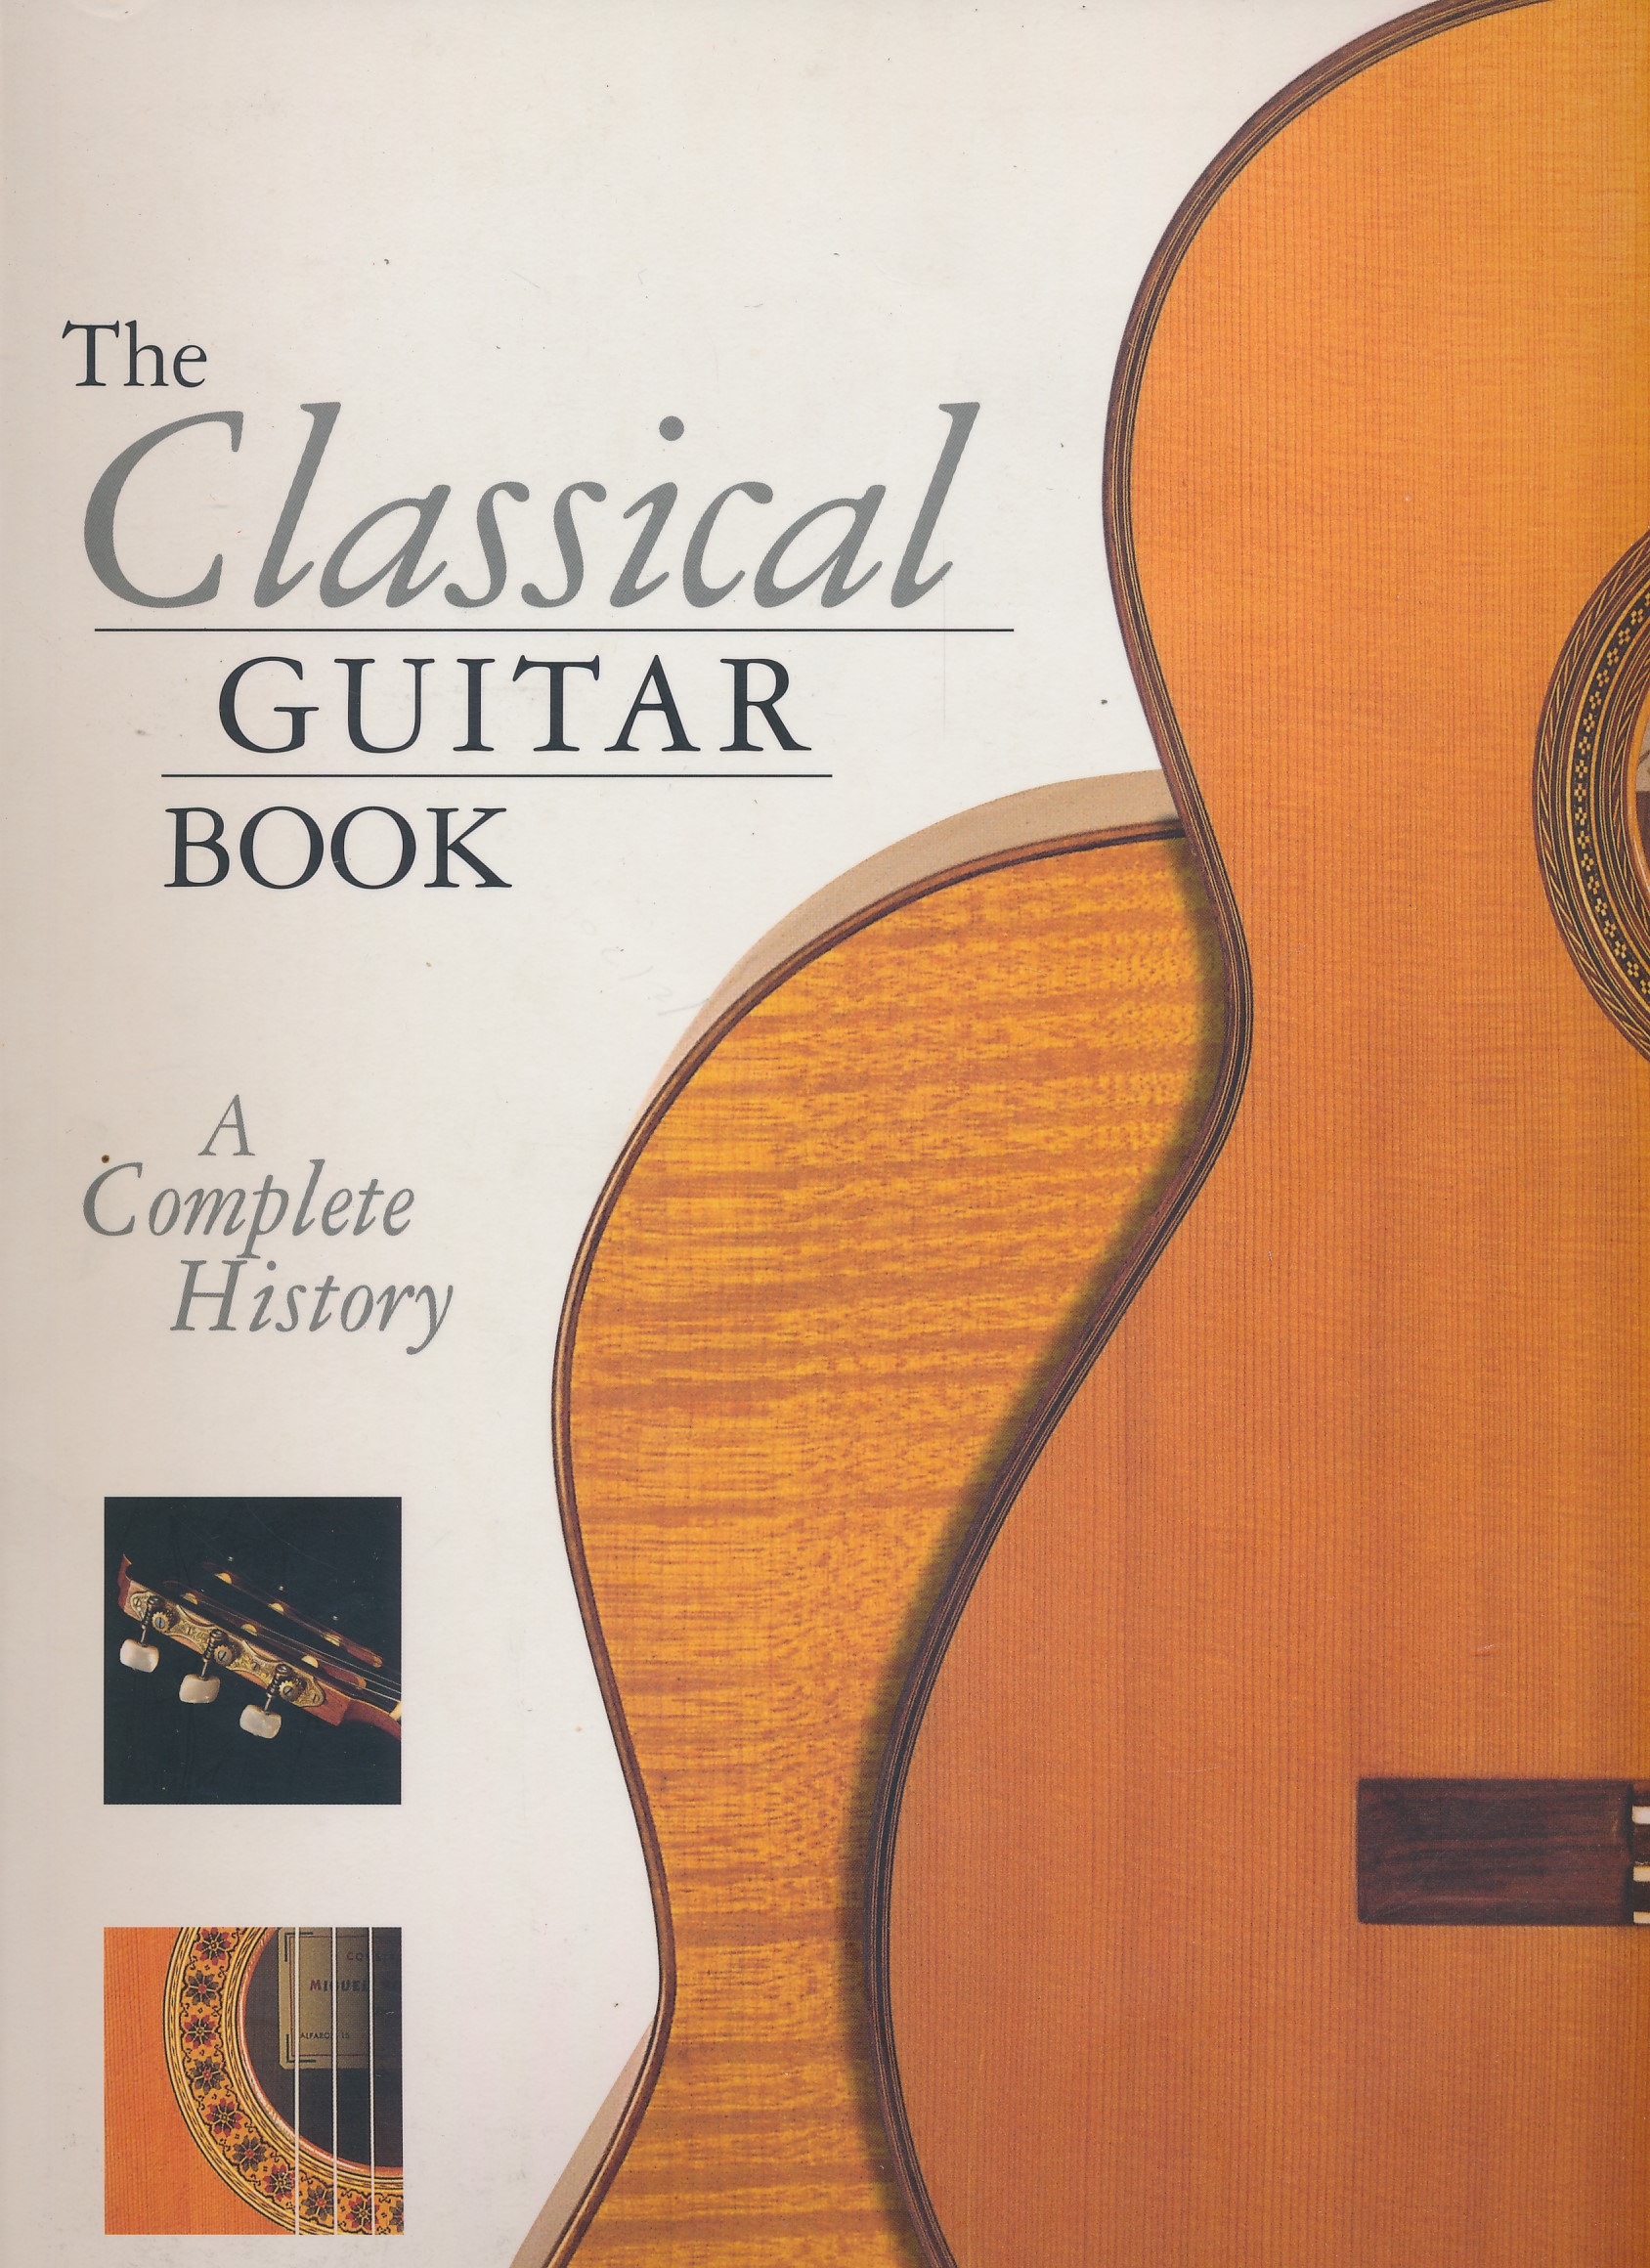 The Classical Guitar. A Complete History.